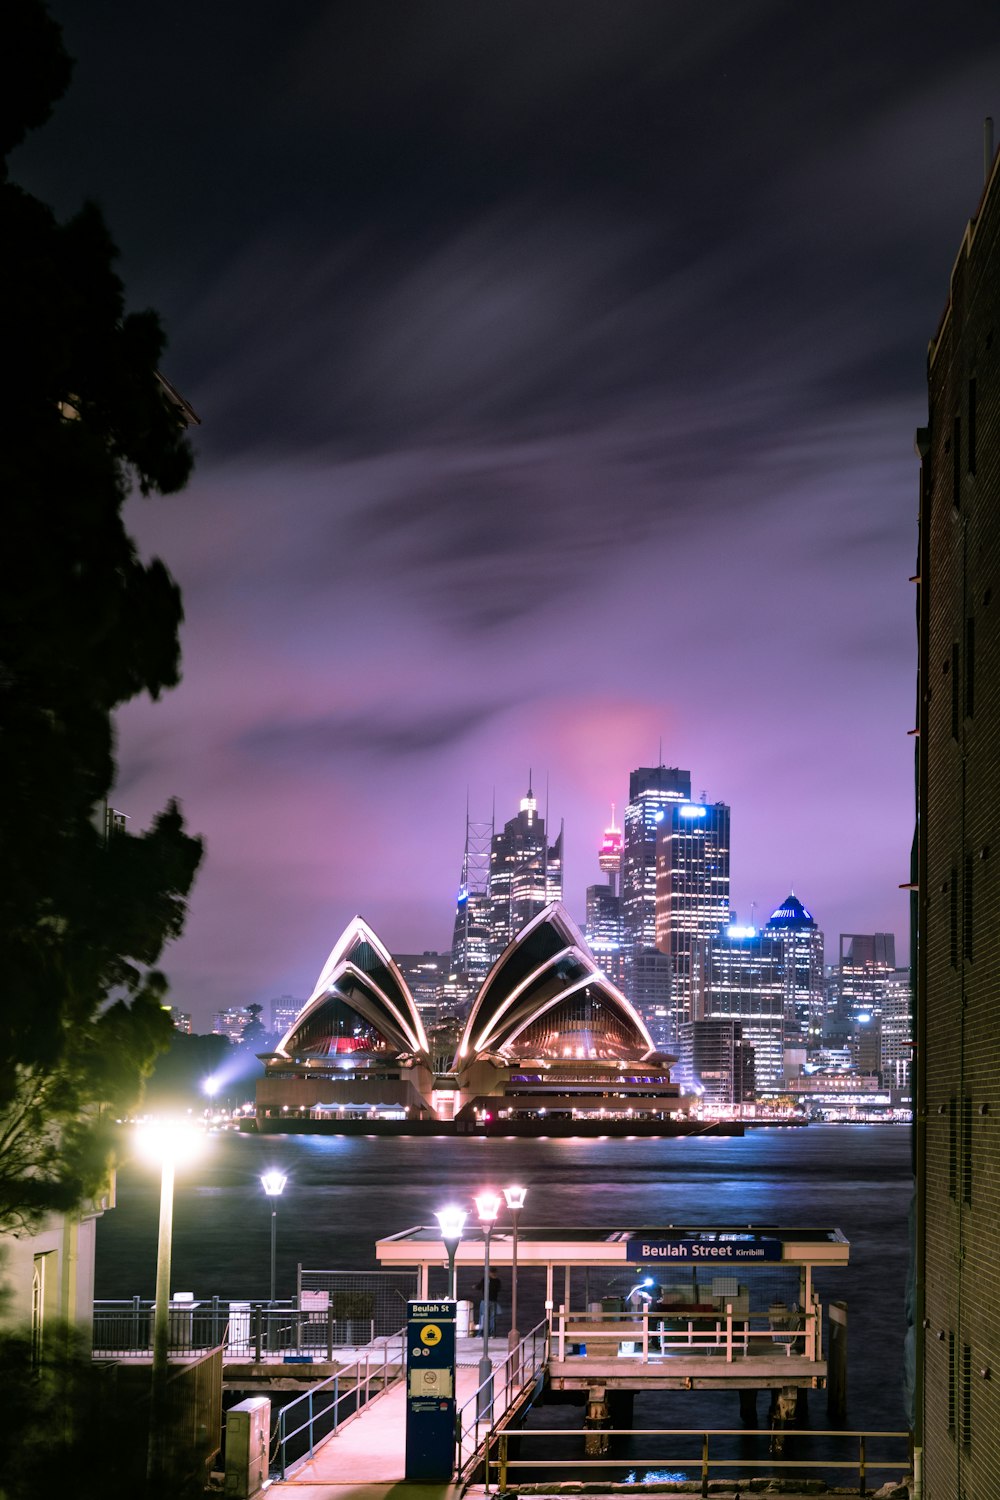 lighted sydney opera house during night time